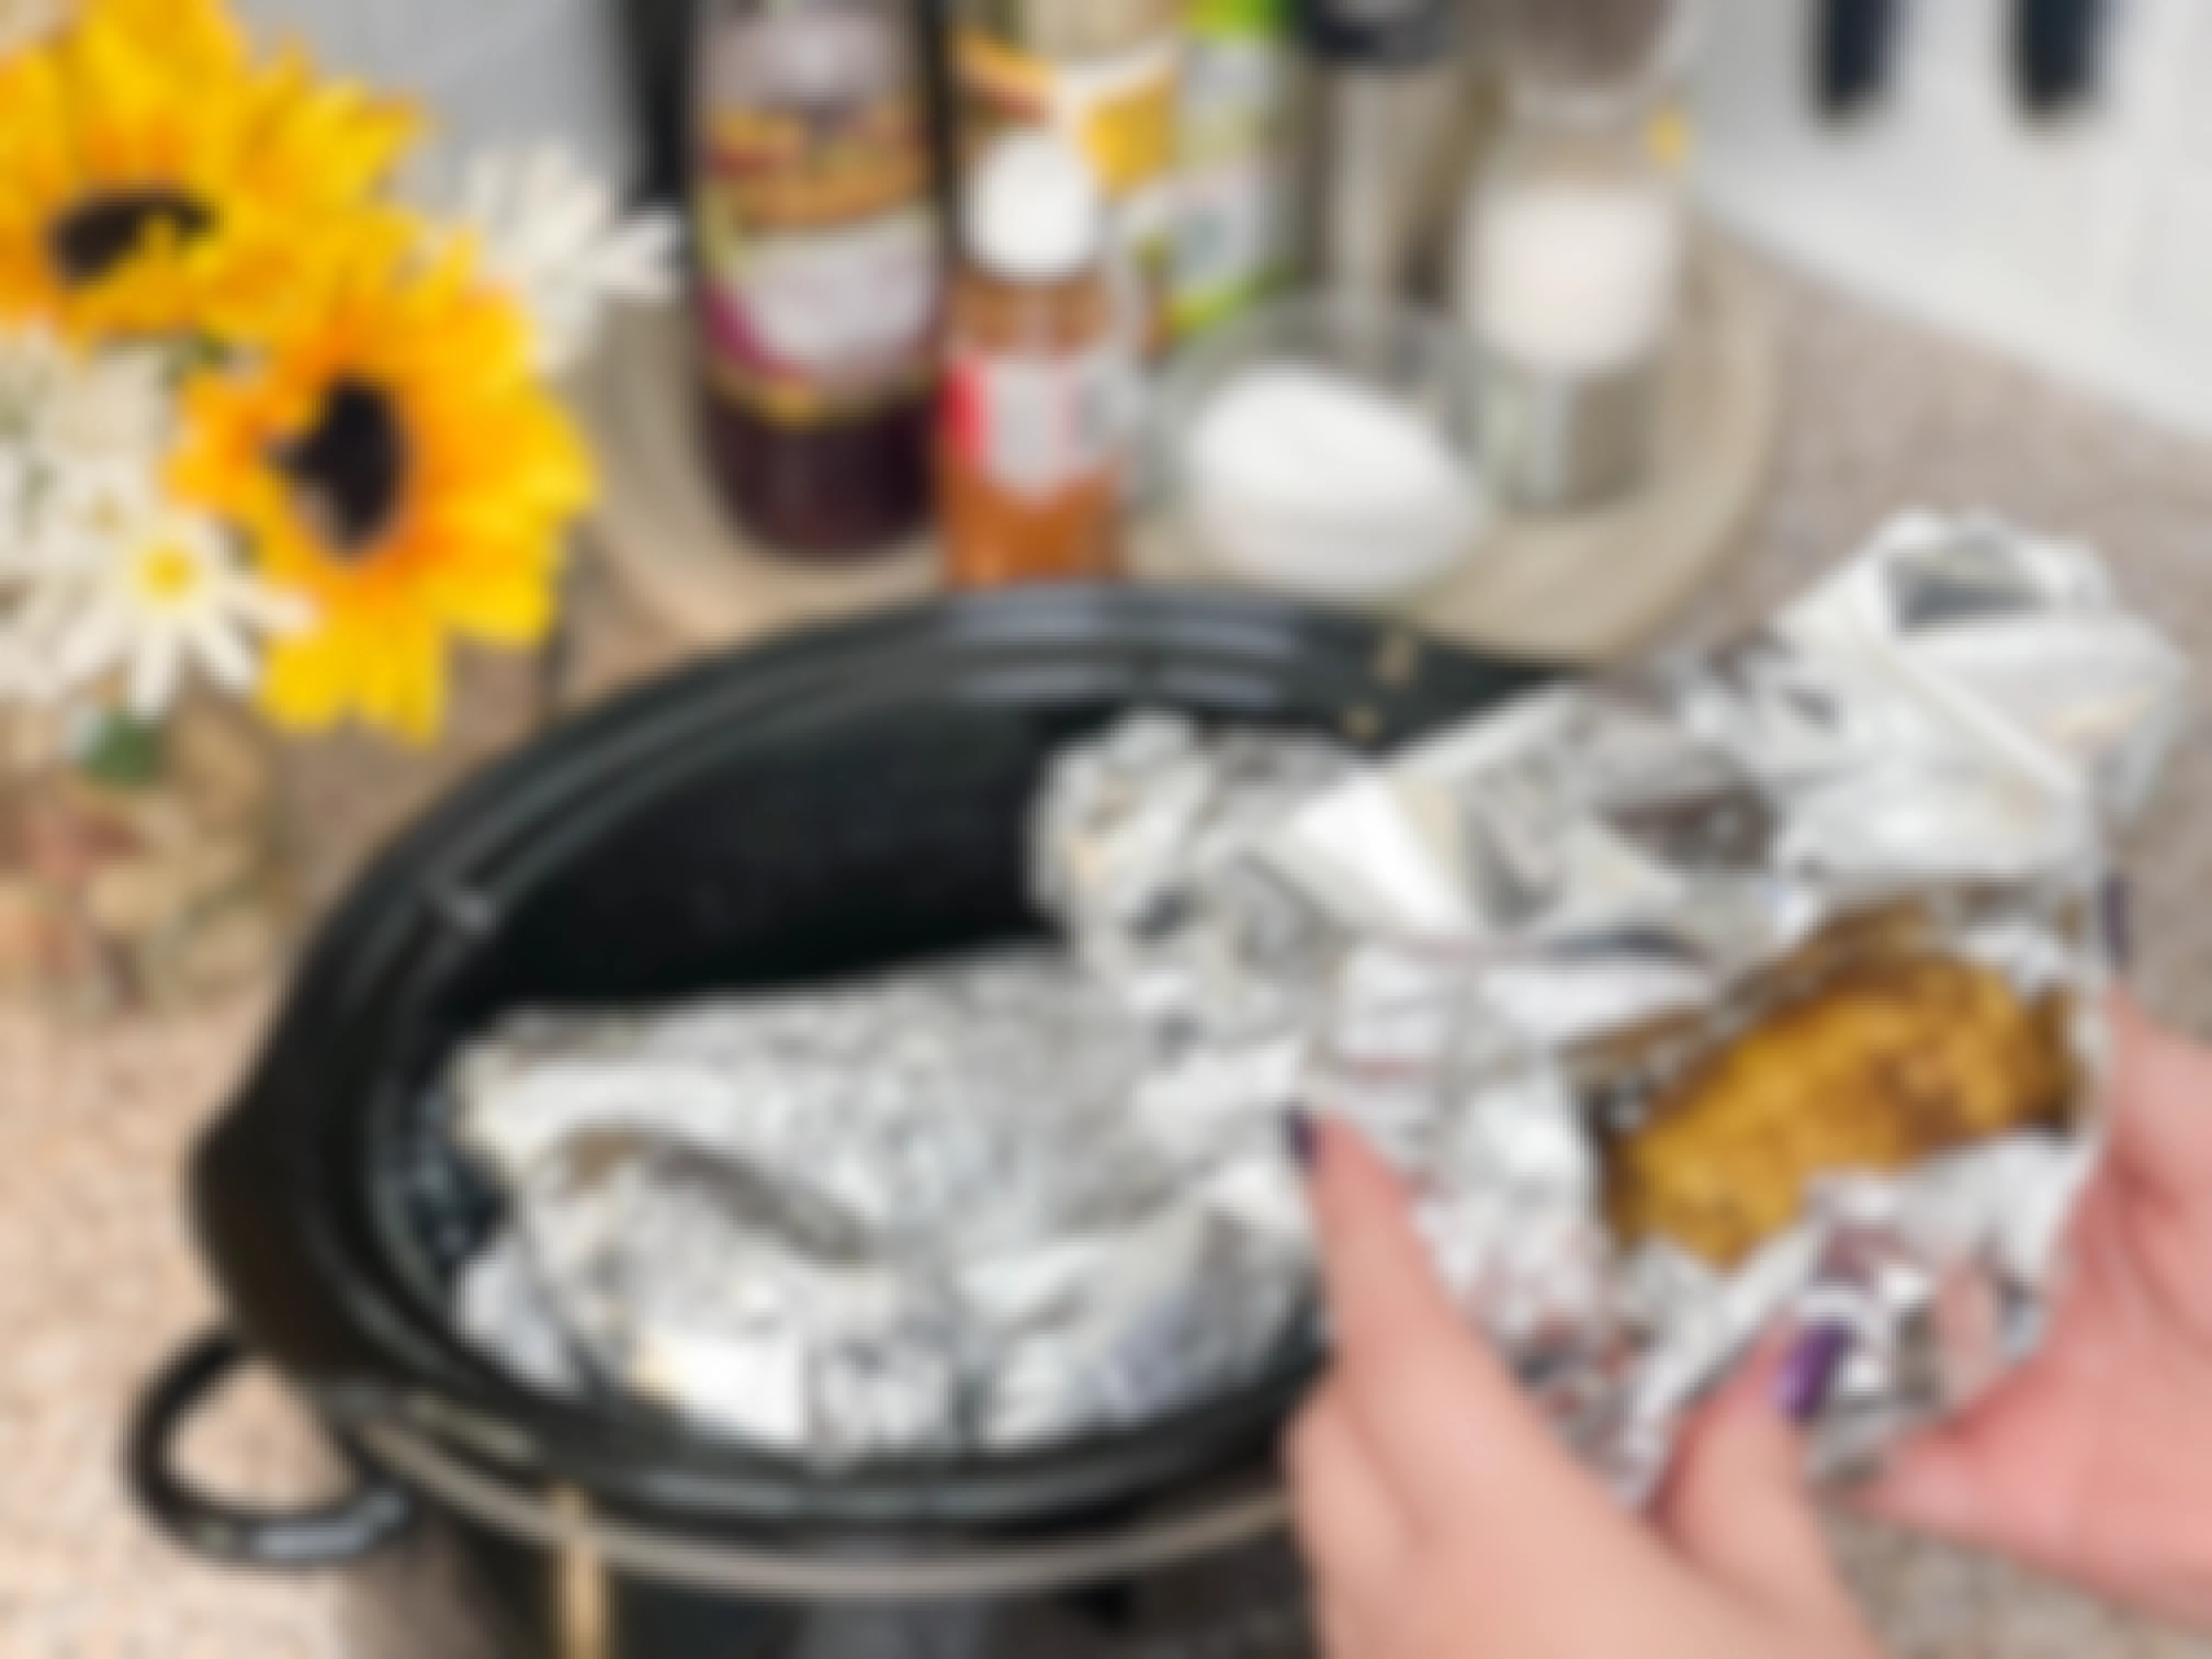 slow cooker meal wrapped in foil